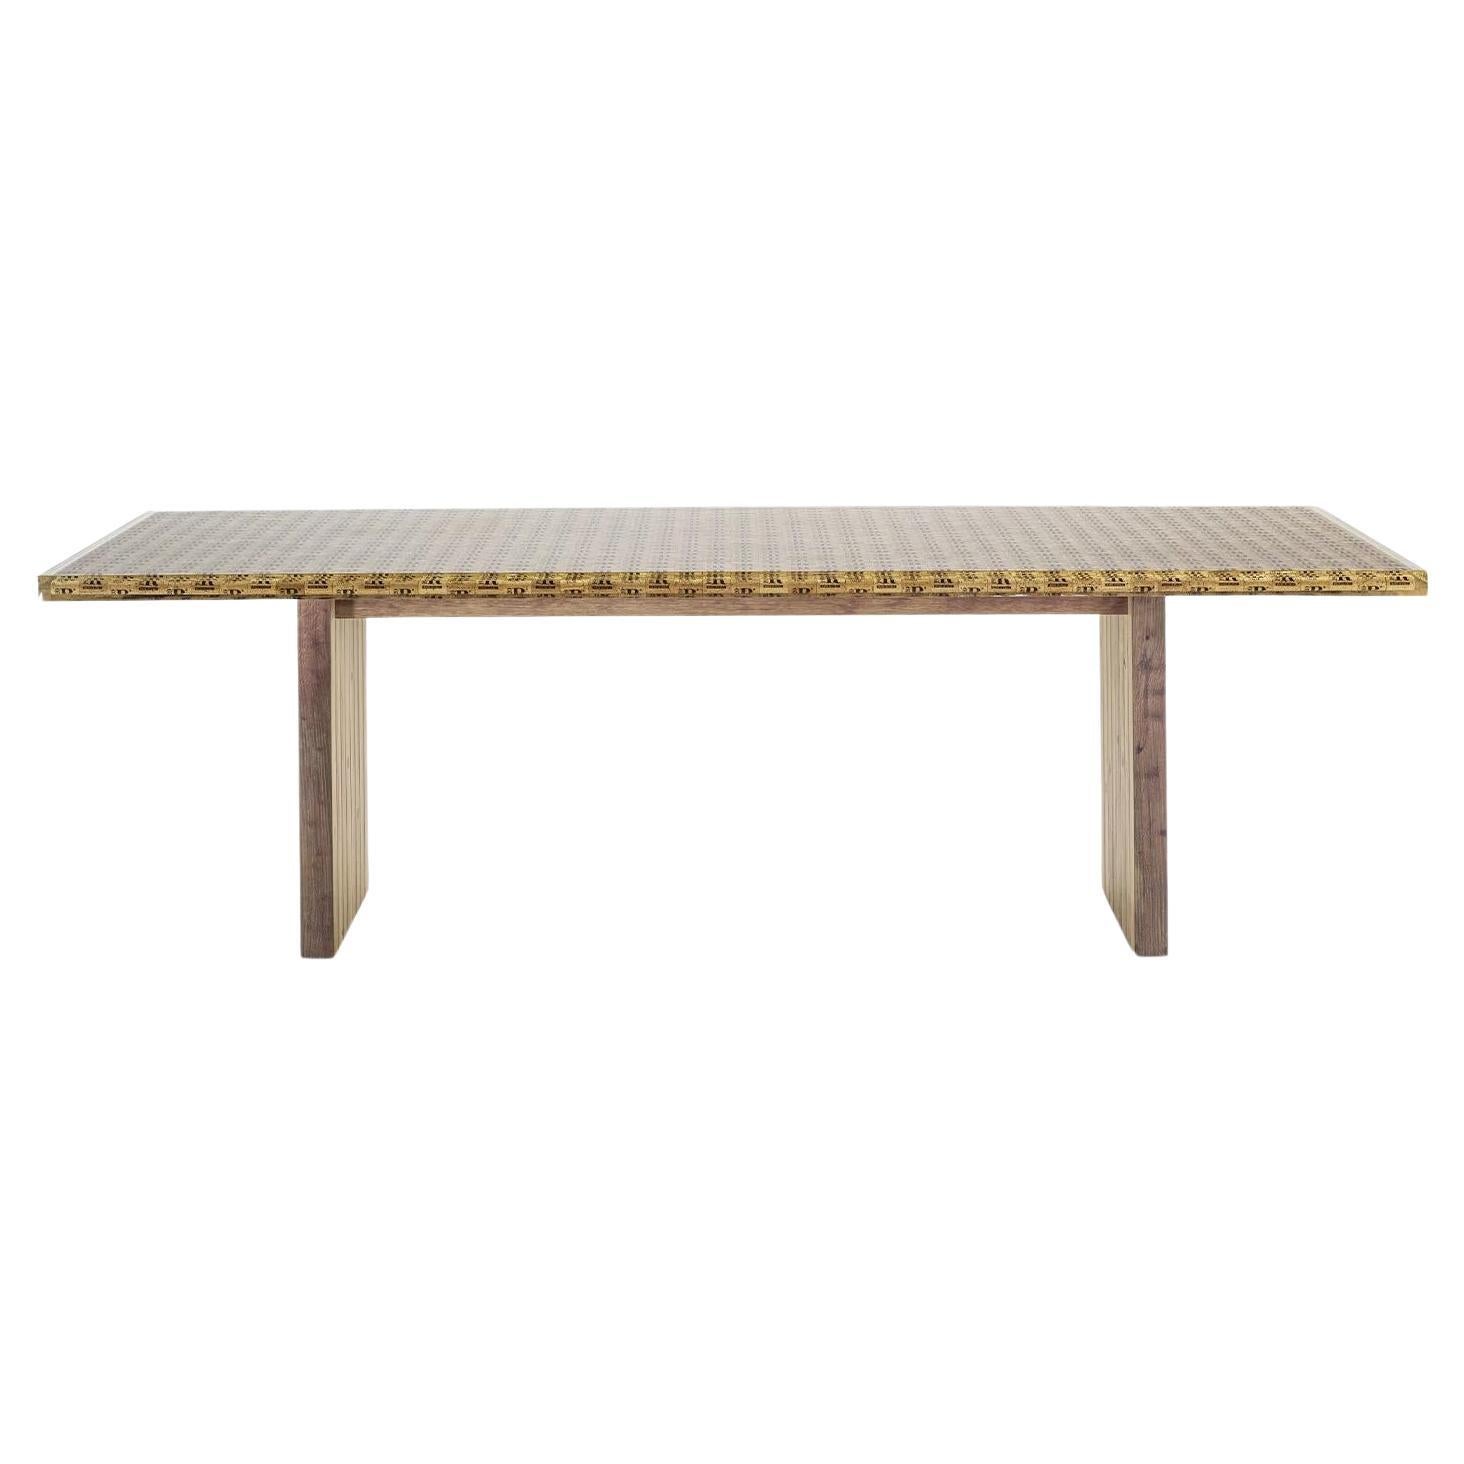 Tap Oak Dining Table, Designed by Authentic Design, Made in Italy